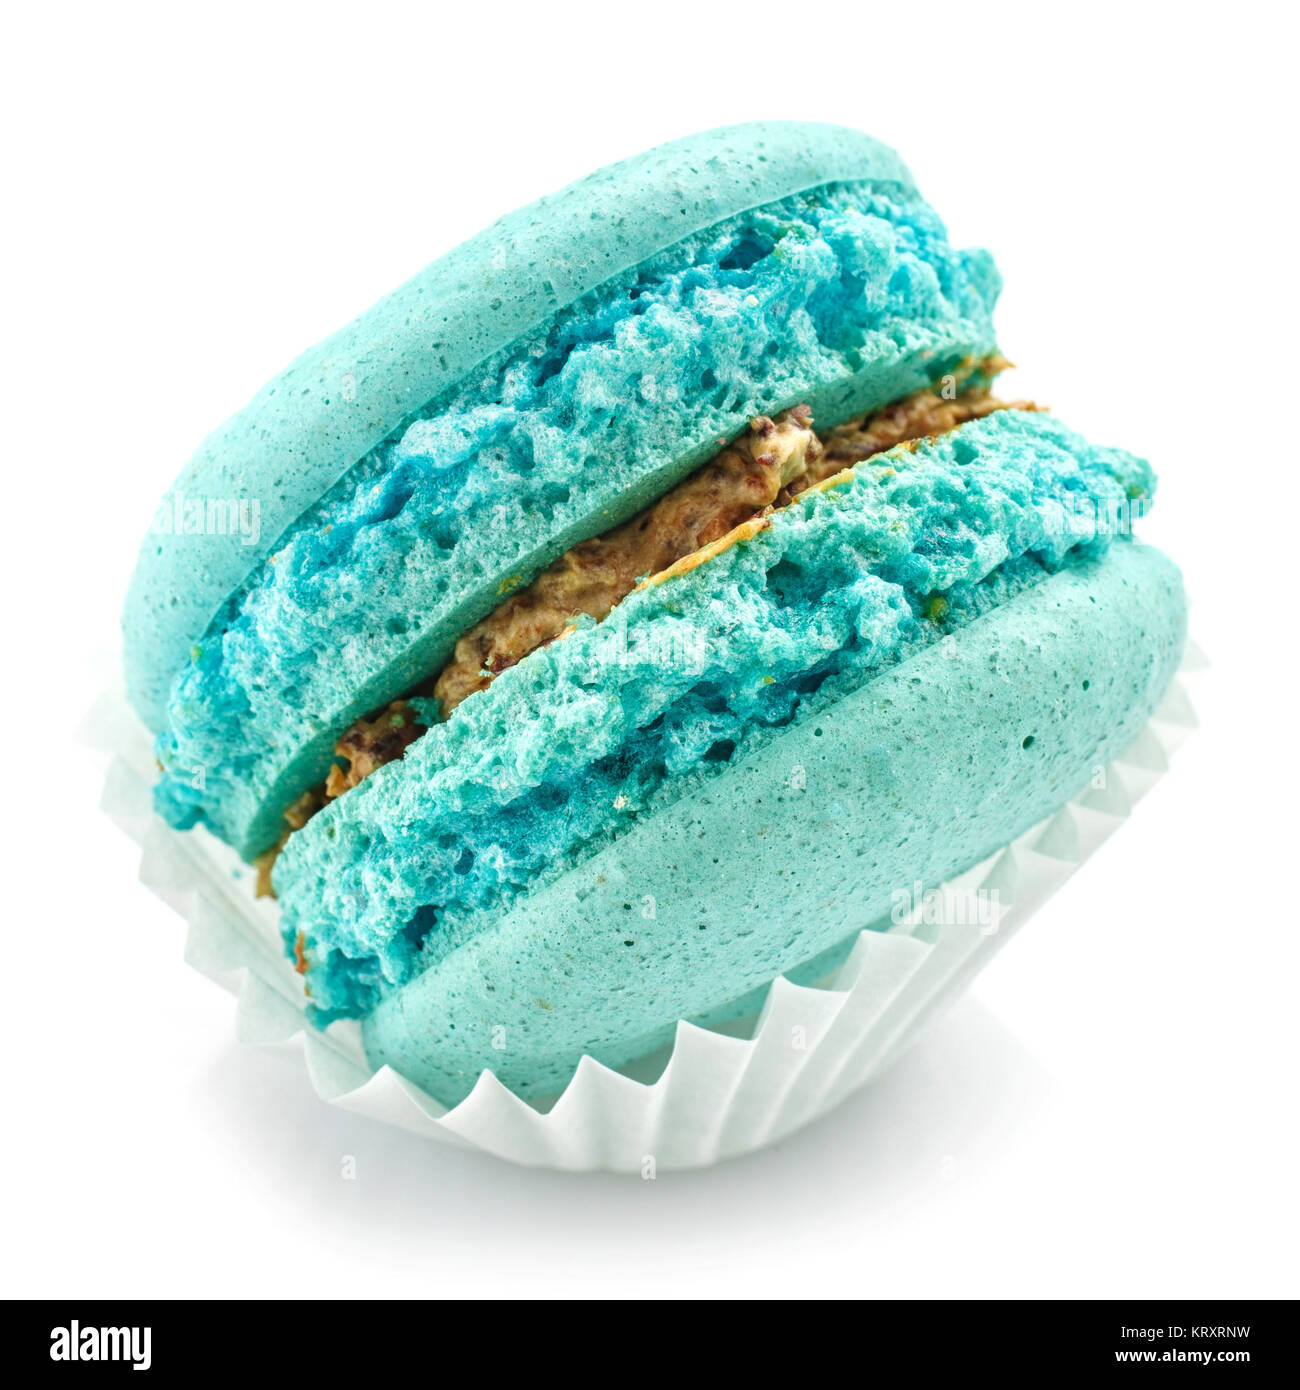 colorful french sweet delicacy, macaroons Stock Photo